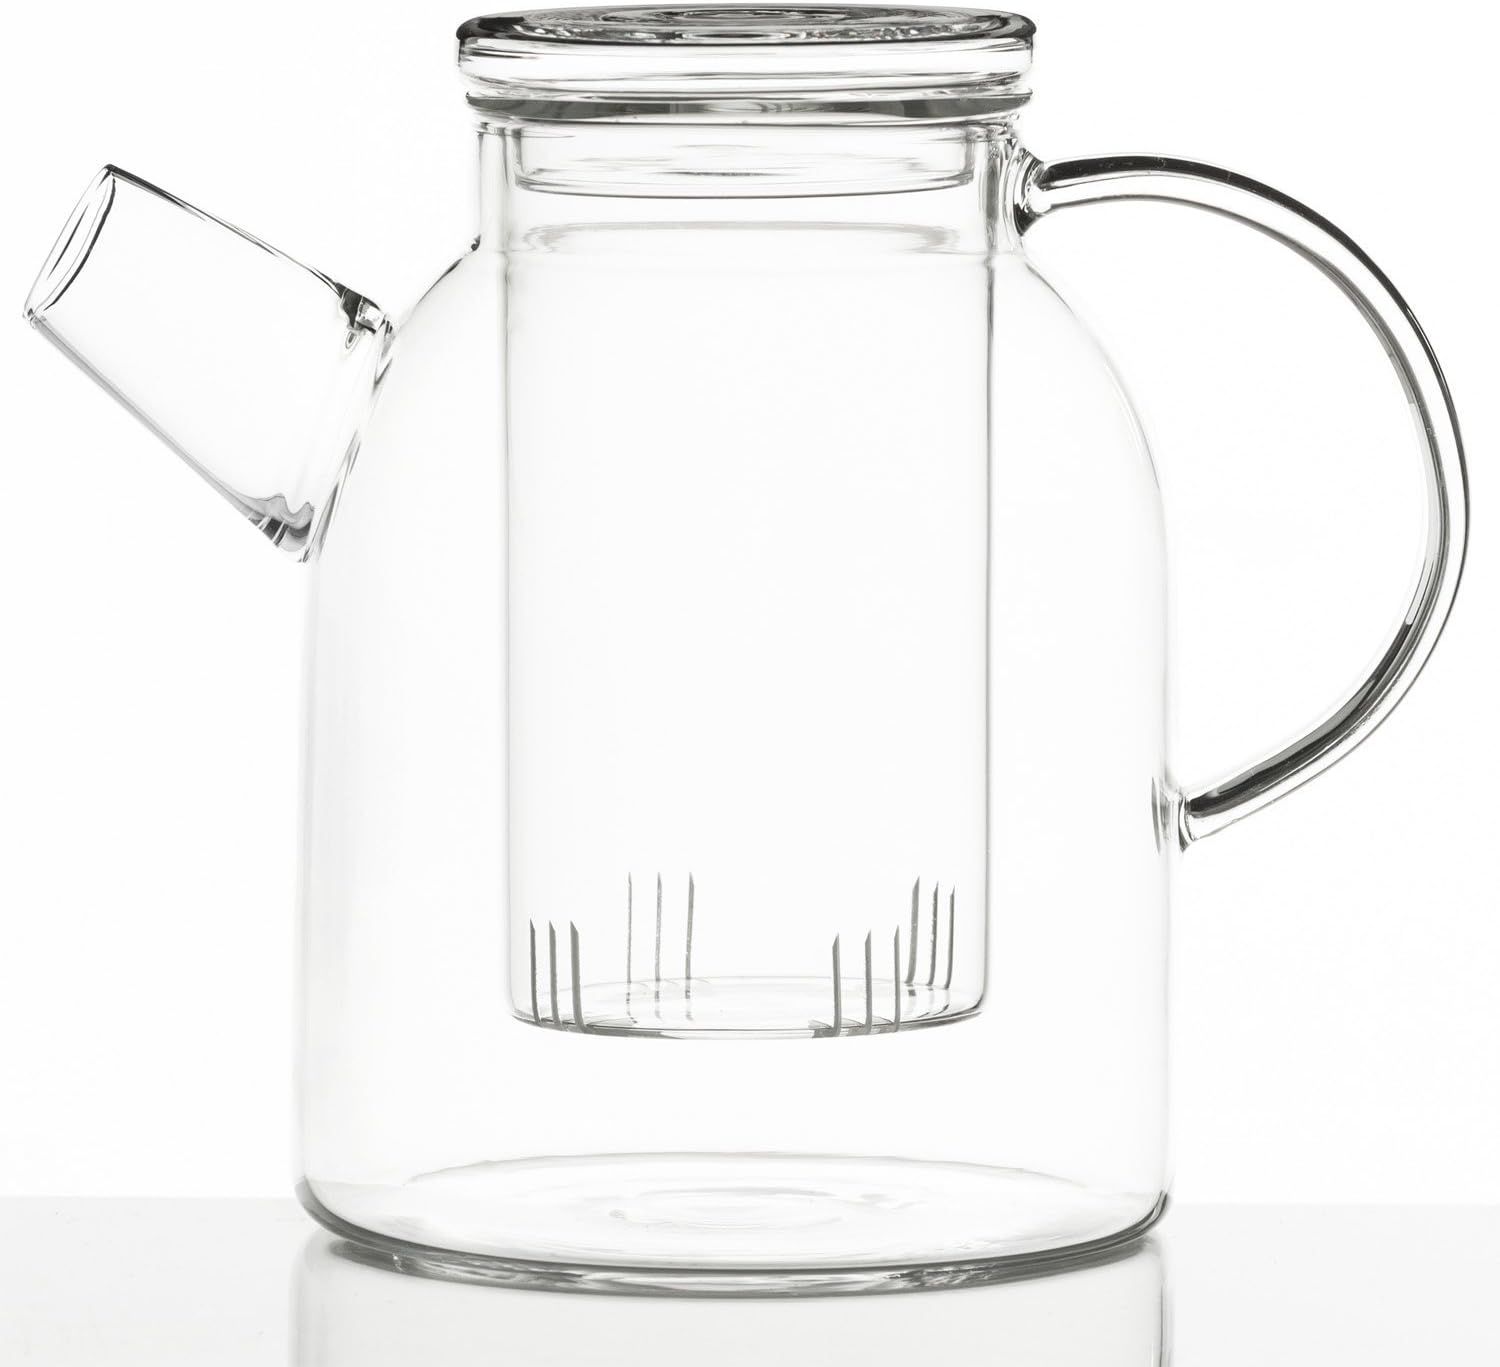 Dimono Mouth-Blown Teapot with Tea Filter & Tea Strainer Pot with Glass Filter Inert (1800 ml)